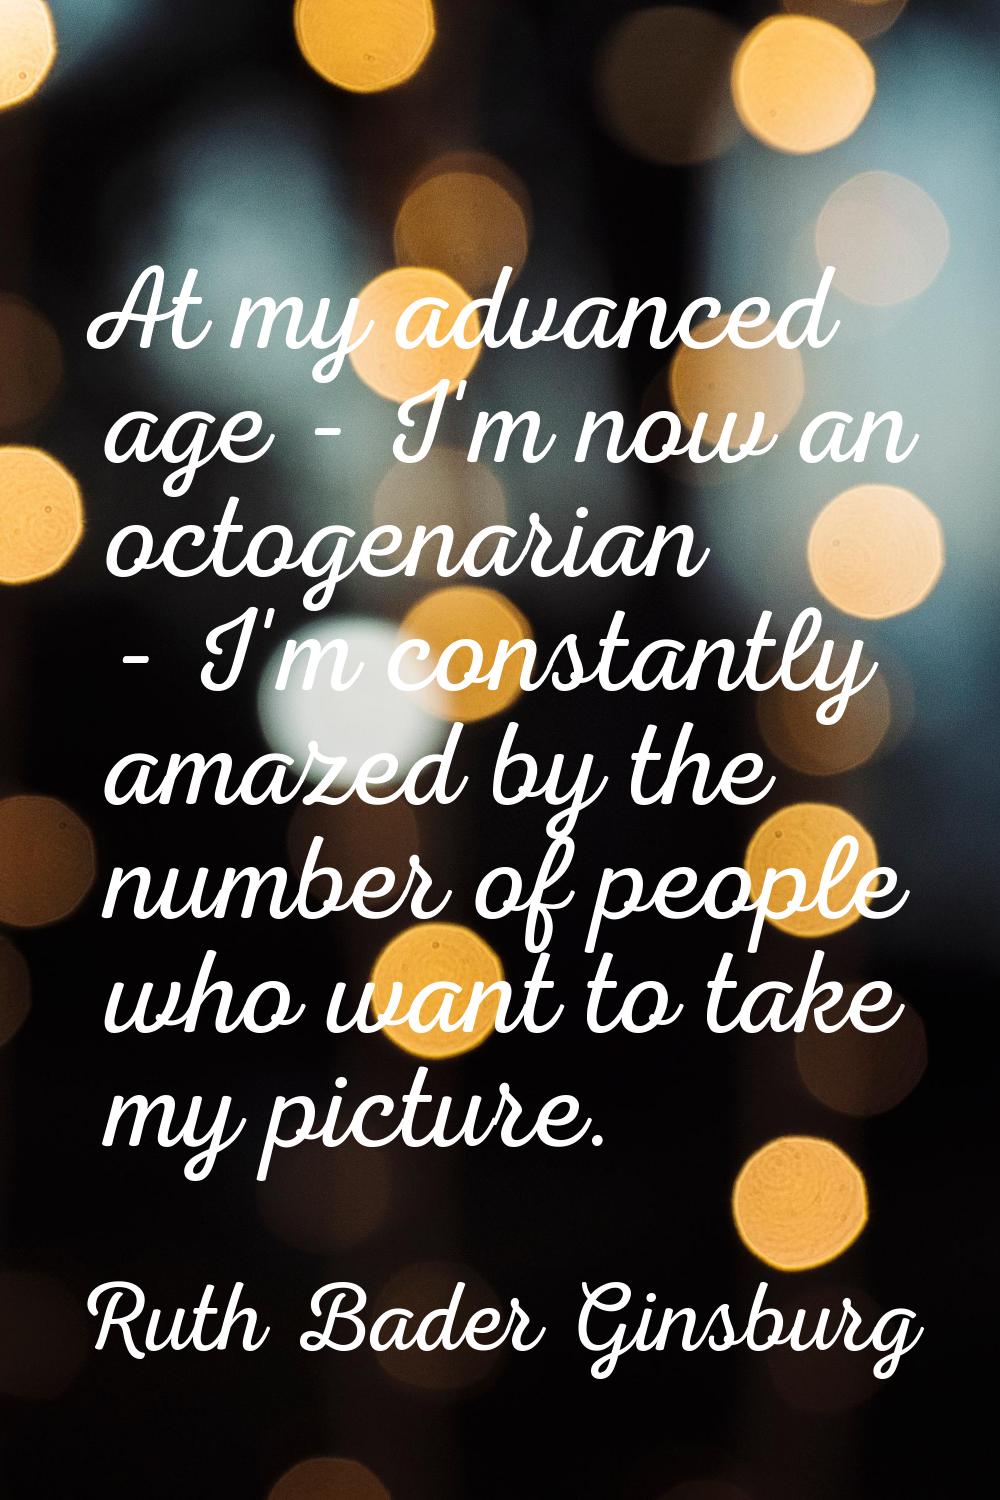 At my advanced age - I'm now an octogenarian - I'm constantly amazed by the number of people who wa